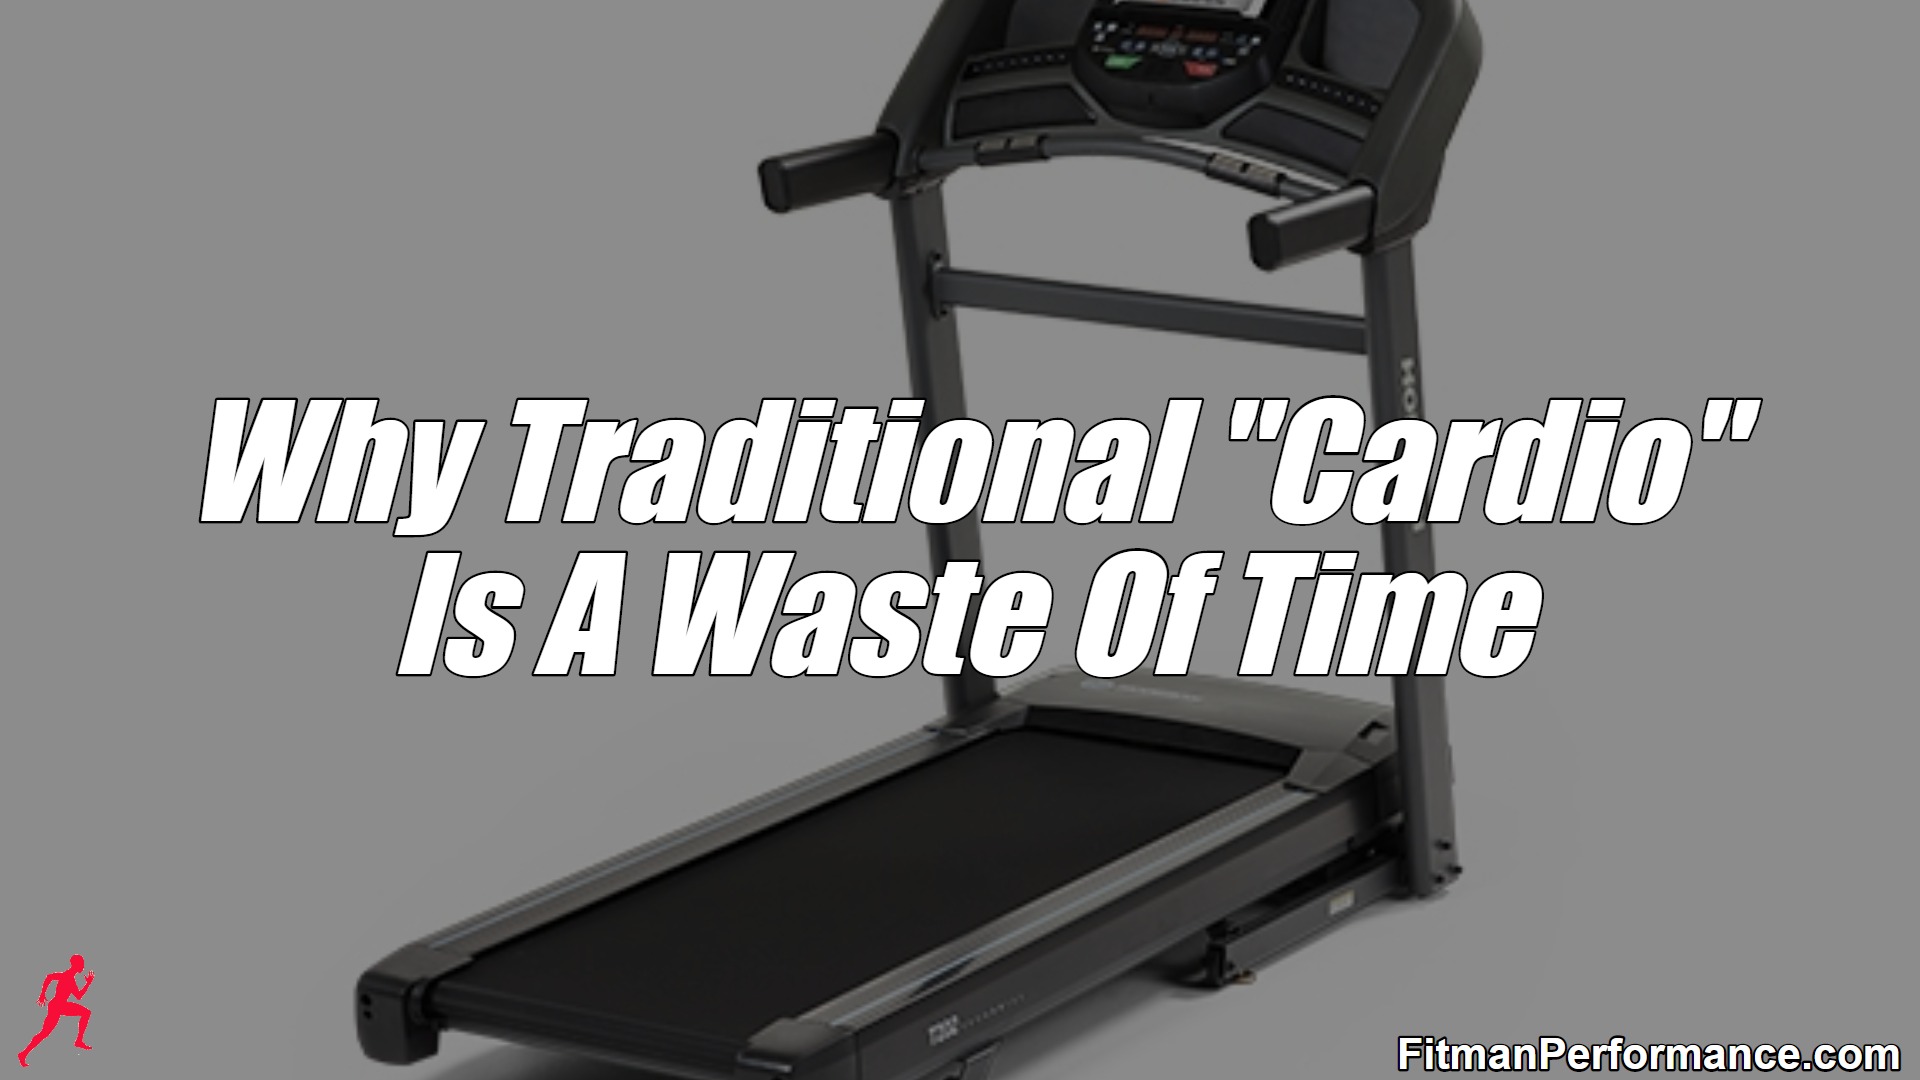 Why Traditional "Cardio" Is A Waste Of Time